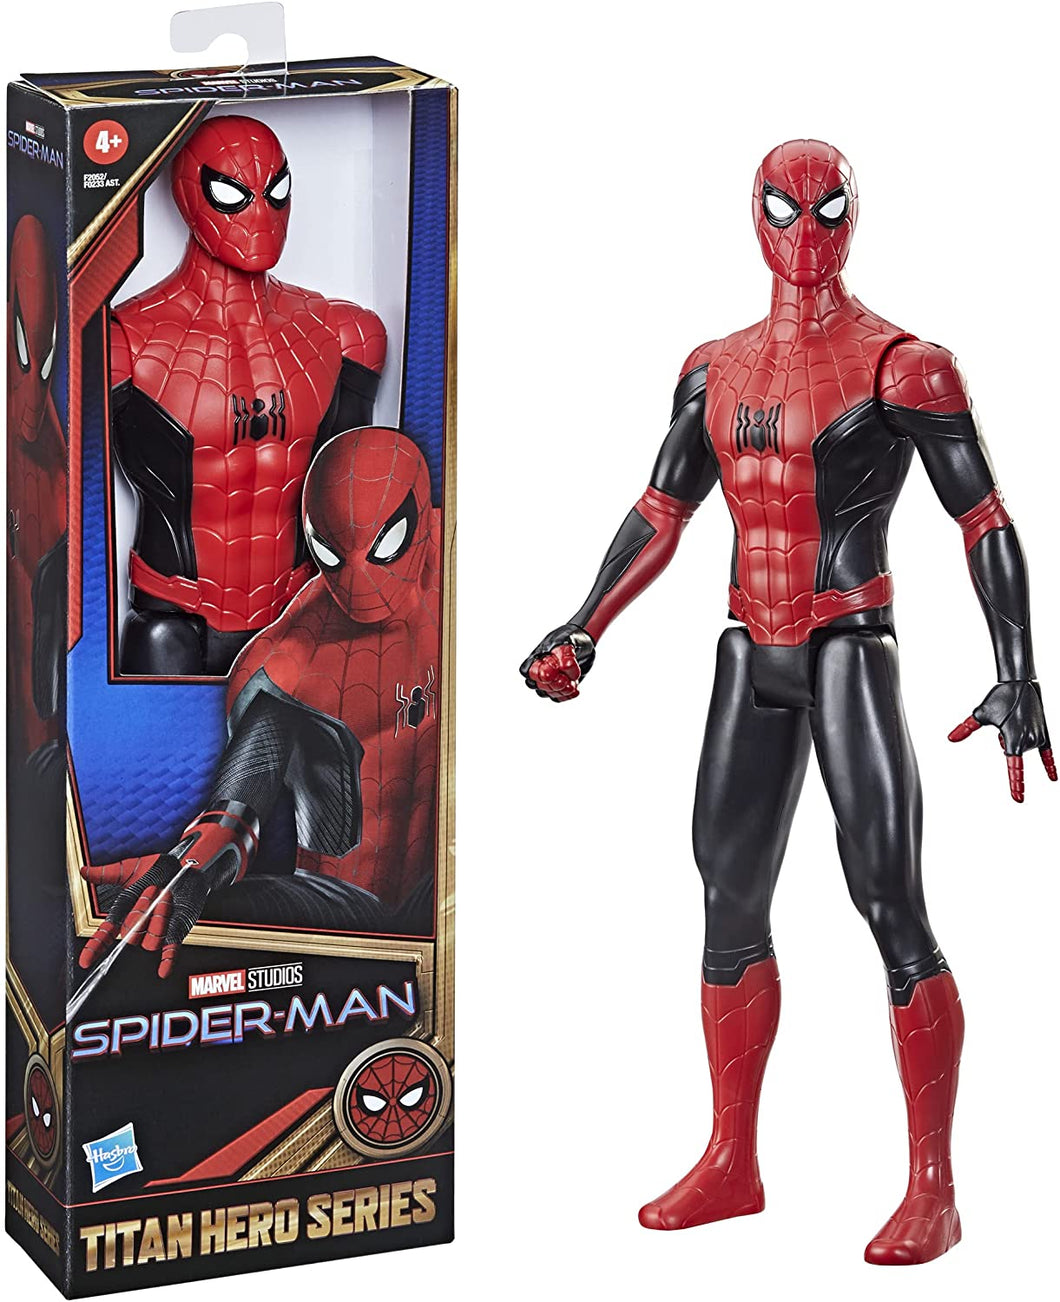 Spider-Man No Way Home Titan Hero Series Black and Red Suit 12